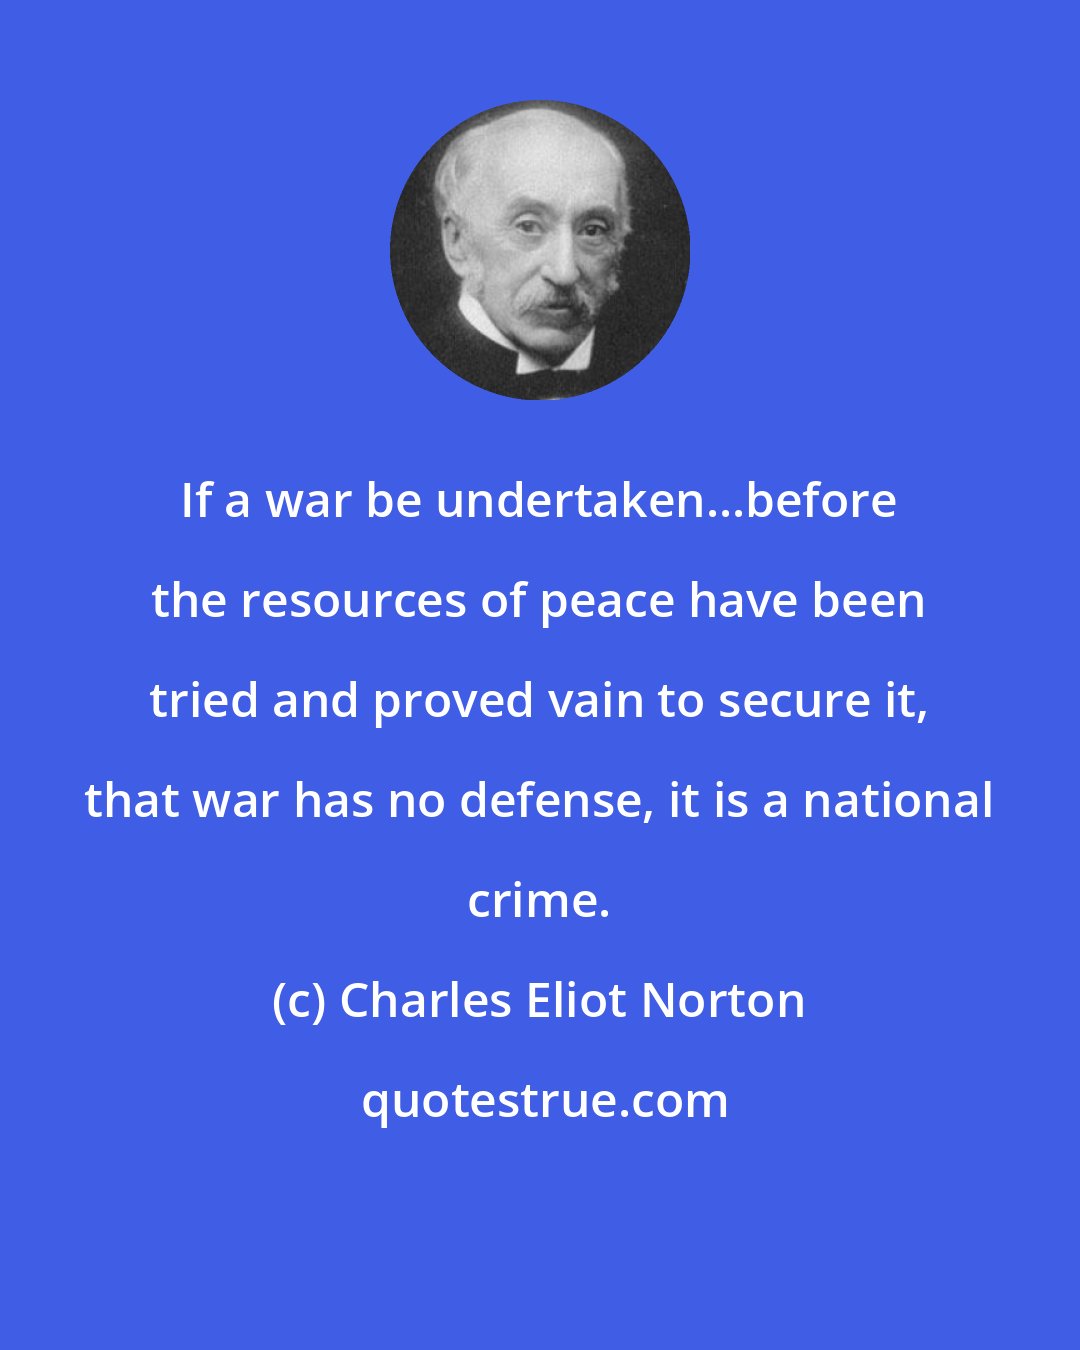 Charles Eliot Norton: If a war be undertaken...before the resources of peace have been tried and proved vain to secure it, that war has no defense, it is a national crime.